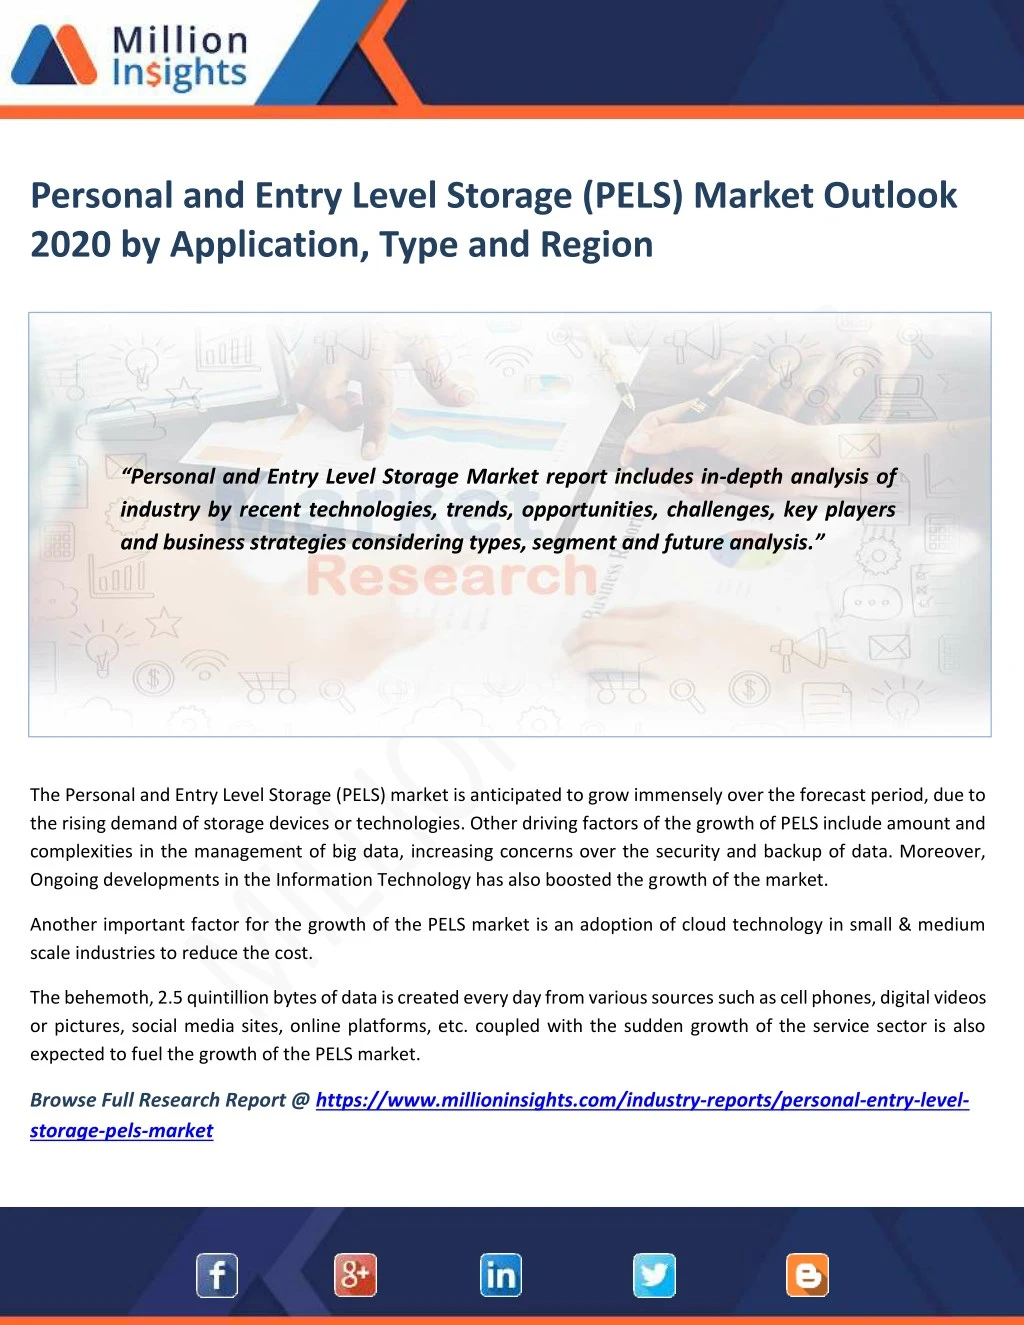 personal and entry level storage pels market